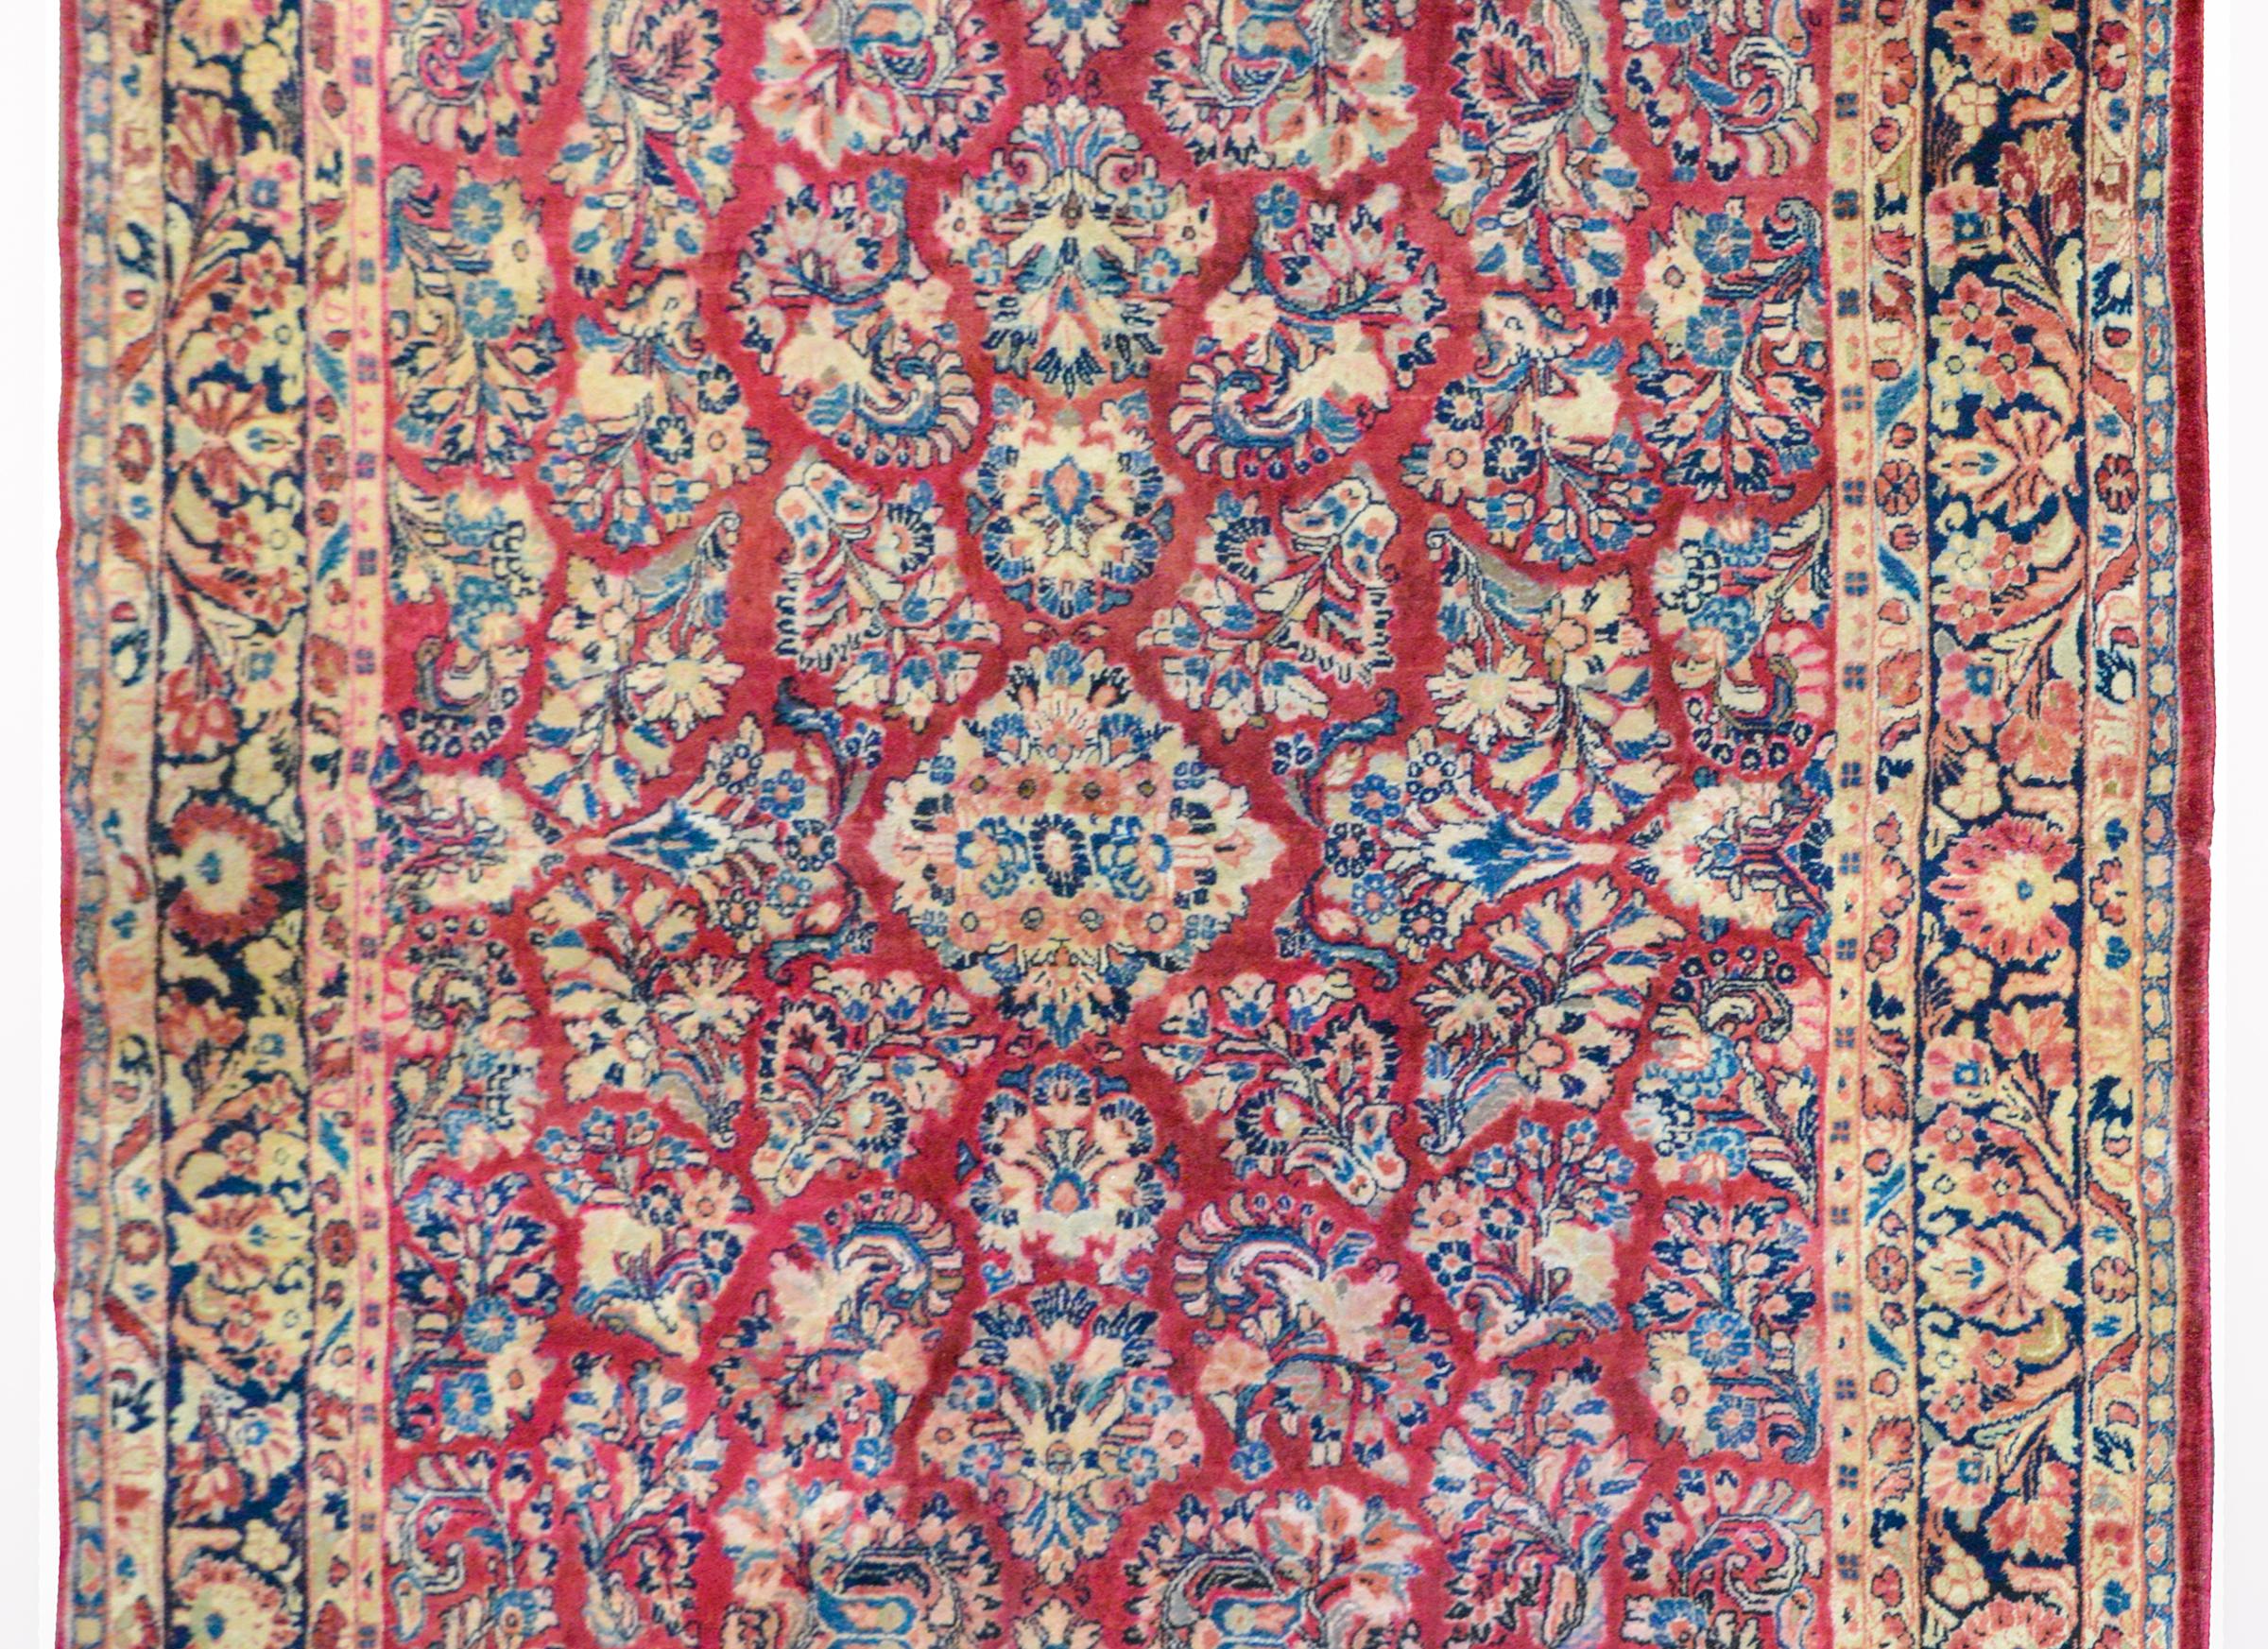 A beautiful early 20th century Persian Sarouk rug with an all-over mirrored floral cluster pattern woven in light and dark indigo, cream, and orange, against a cranberry field and surrounded by a large-scale floral partnered border, flanked by